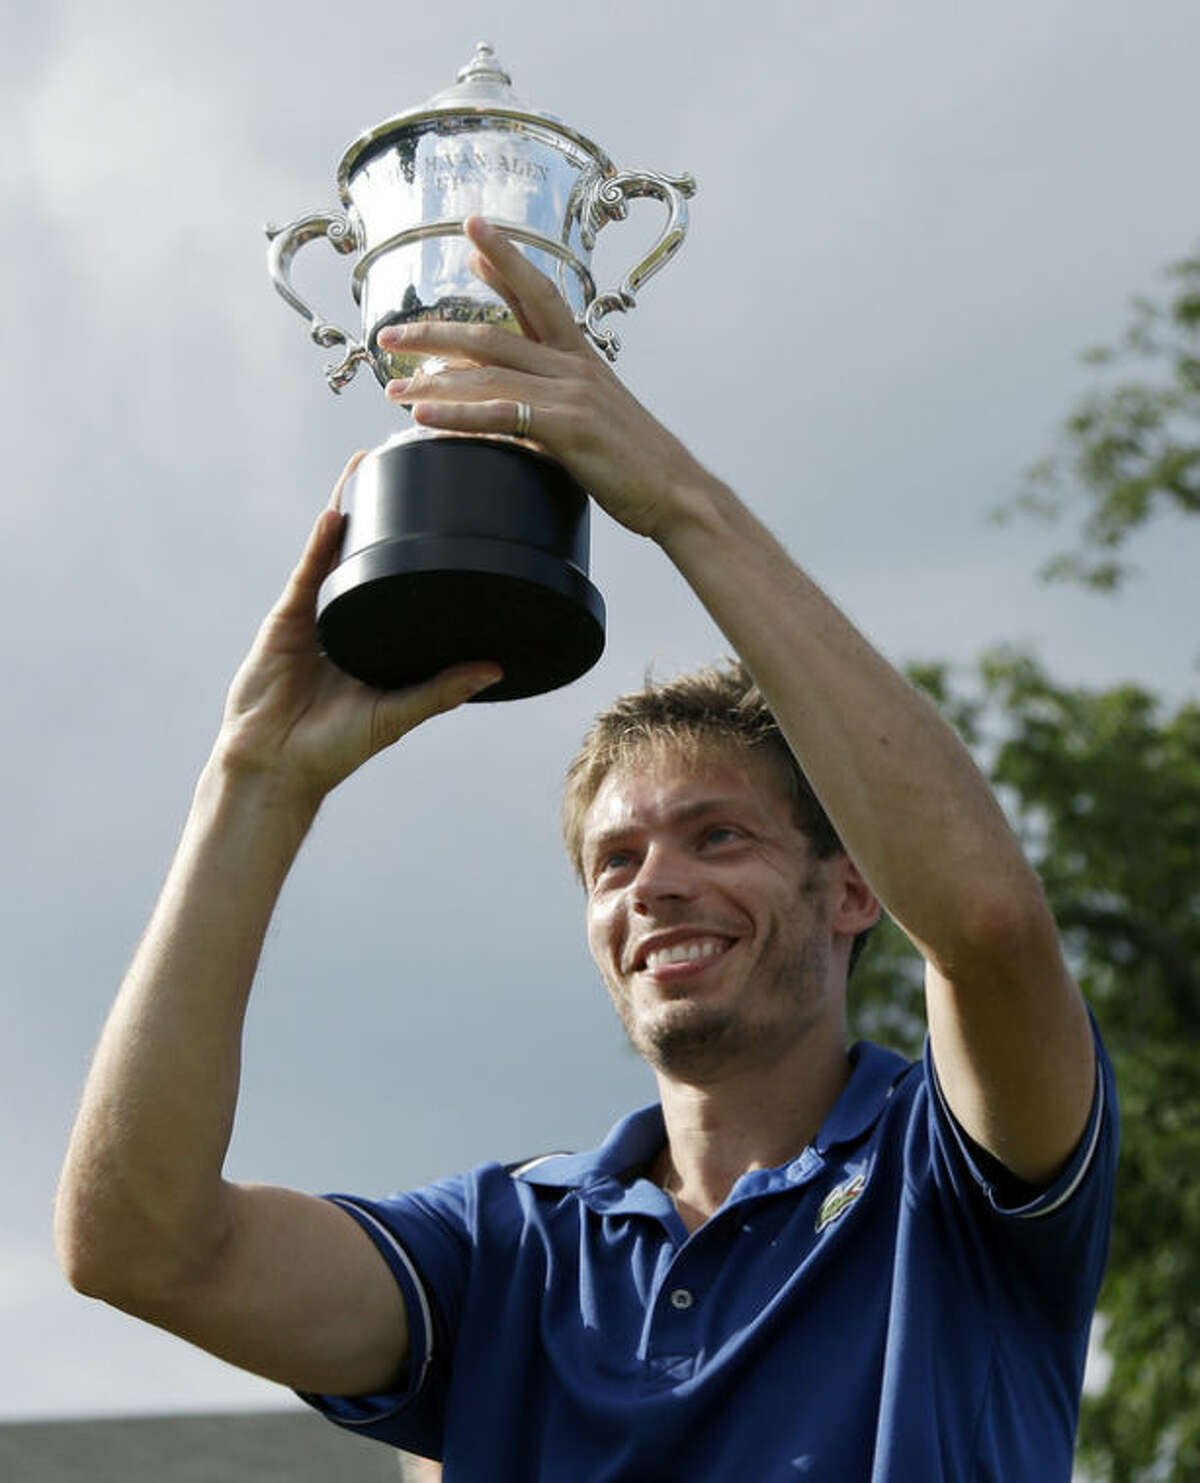 Nicolas Mahut, of France, hoists the Van Alen Cup after defeating Lleyton Hewitt, of Australia, in the finals of the Hall of Fame Tennis Championships in Newport, R.I. Sunday, July 14, 2013. Mahut won 5-7, 7-5, 6-3. (AP Photo/Elise Amendola)